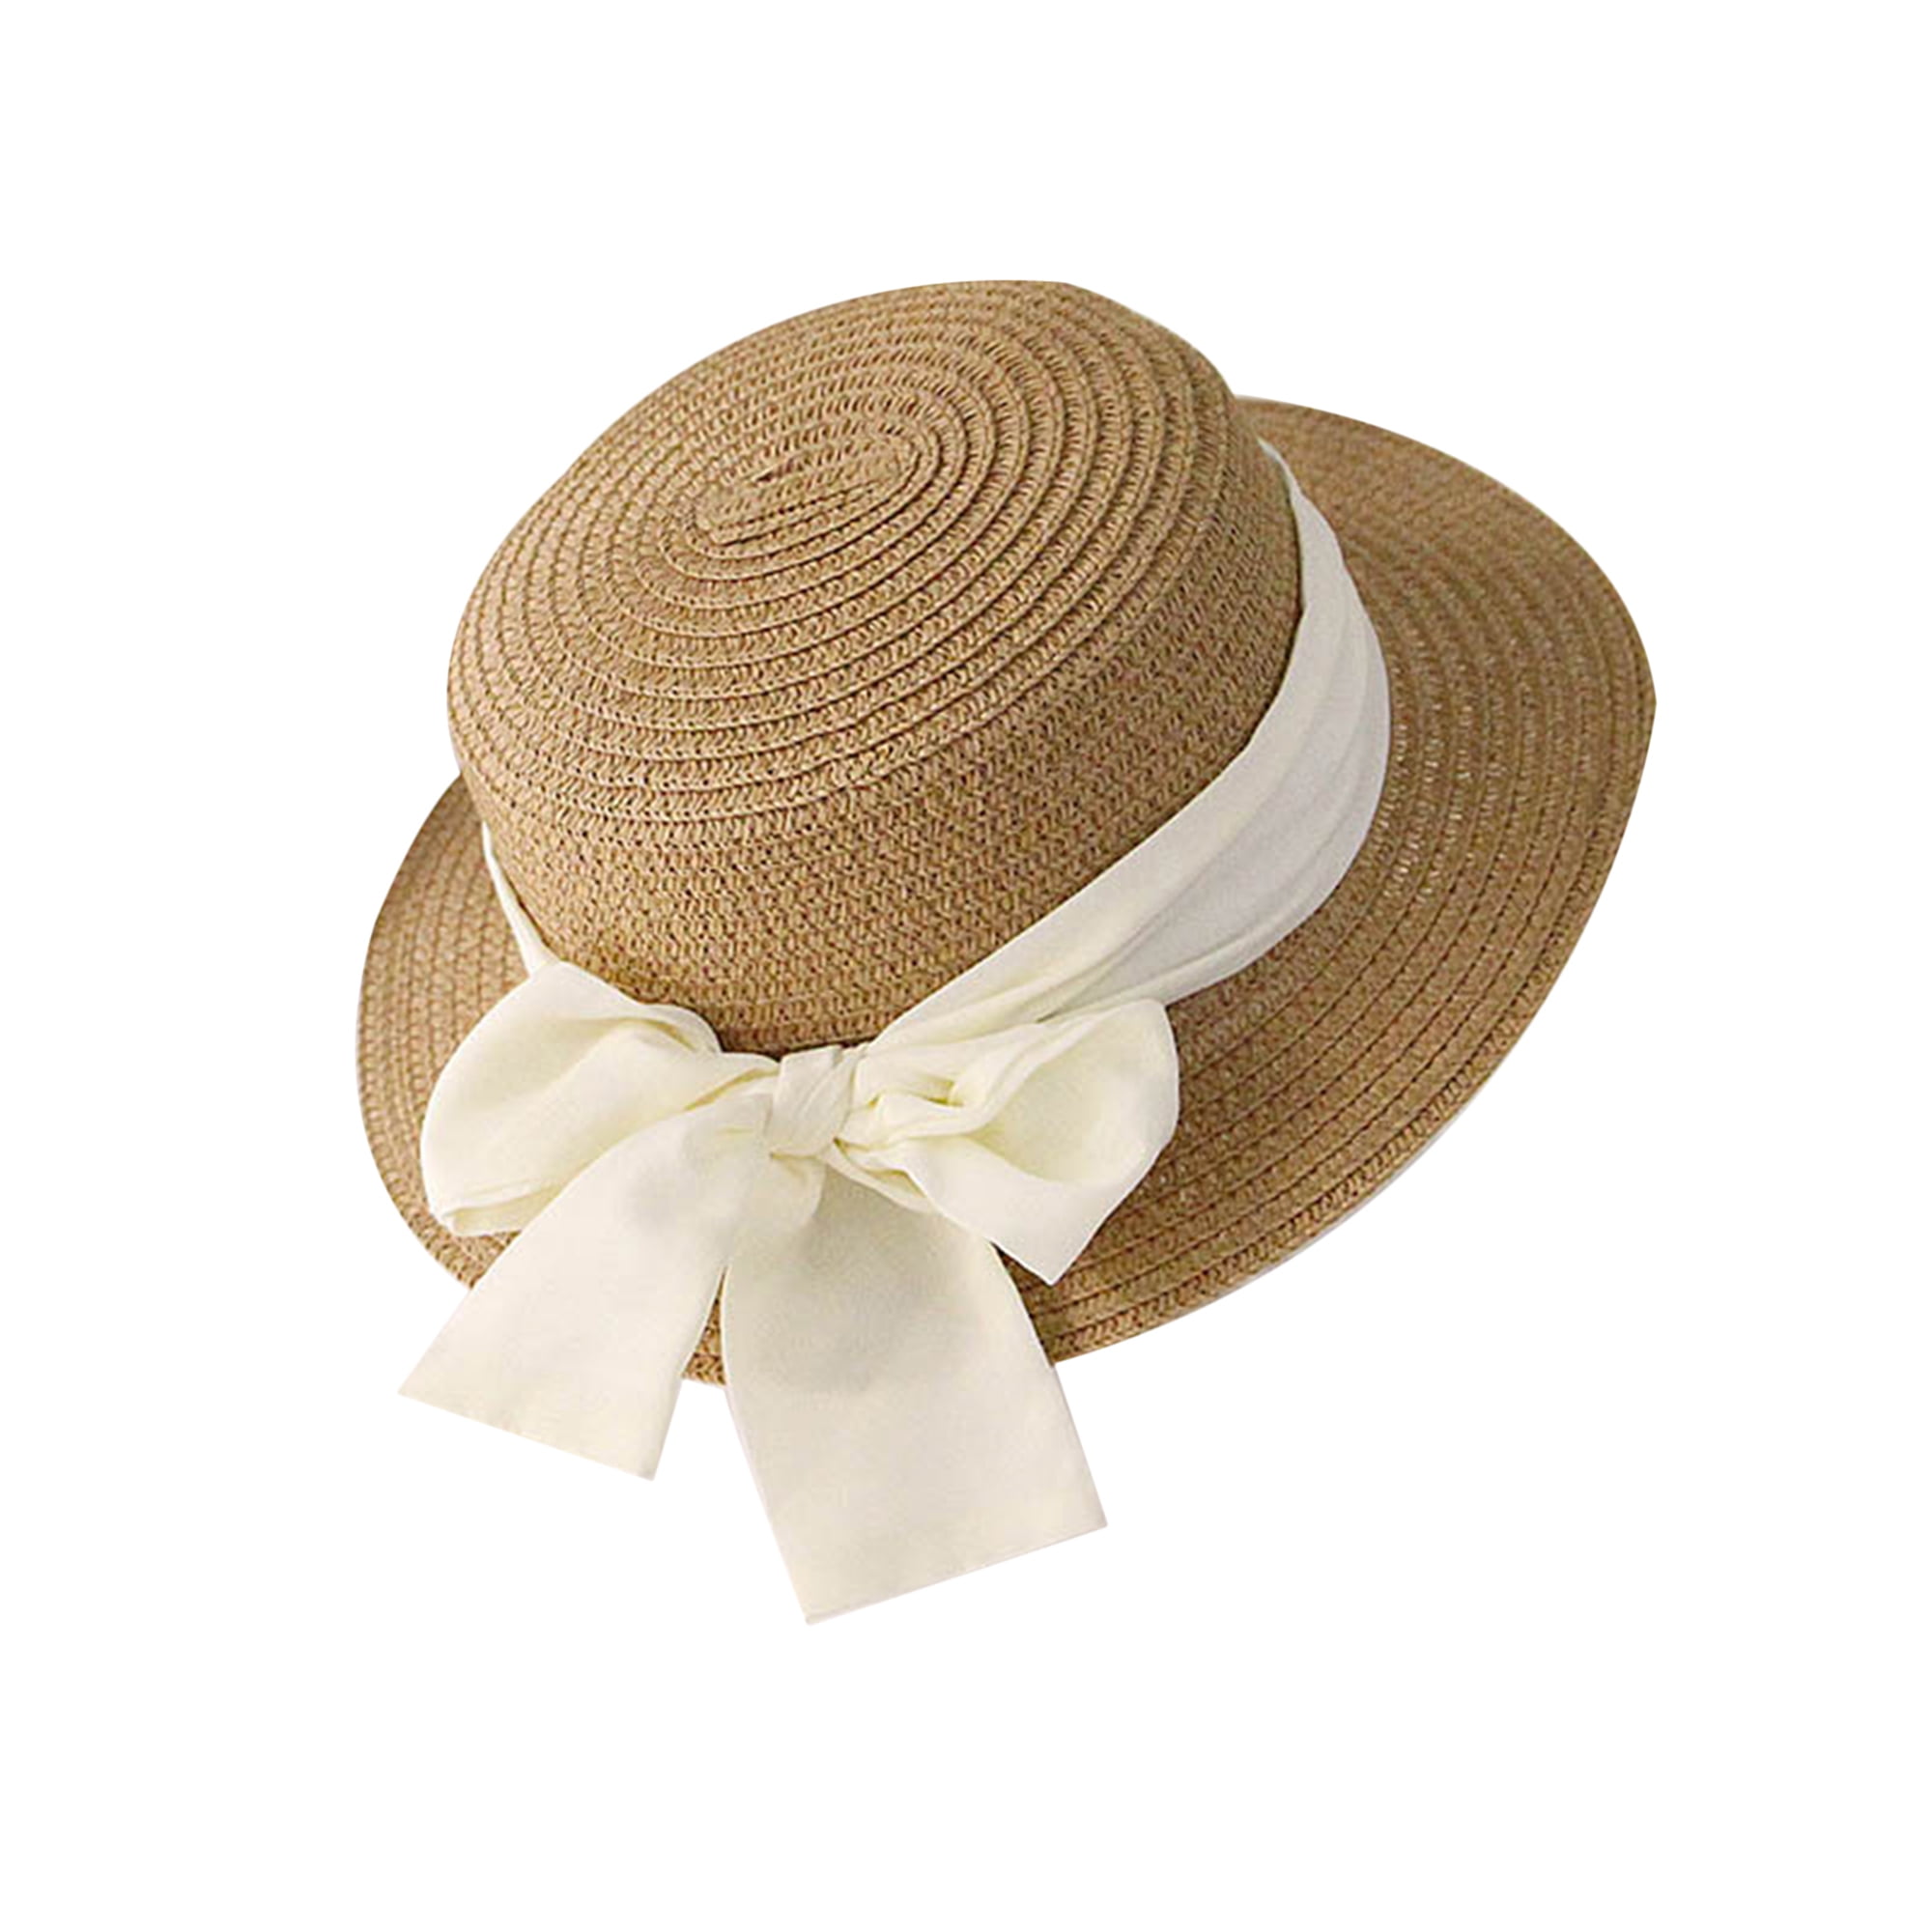 Kids Toddler Little Girl Straw Hat Summer Sun Hats with Big Bow Beach UV  Protection Hats Wide Brim Floppy Hats